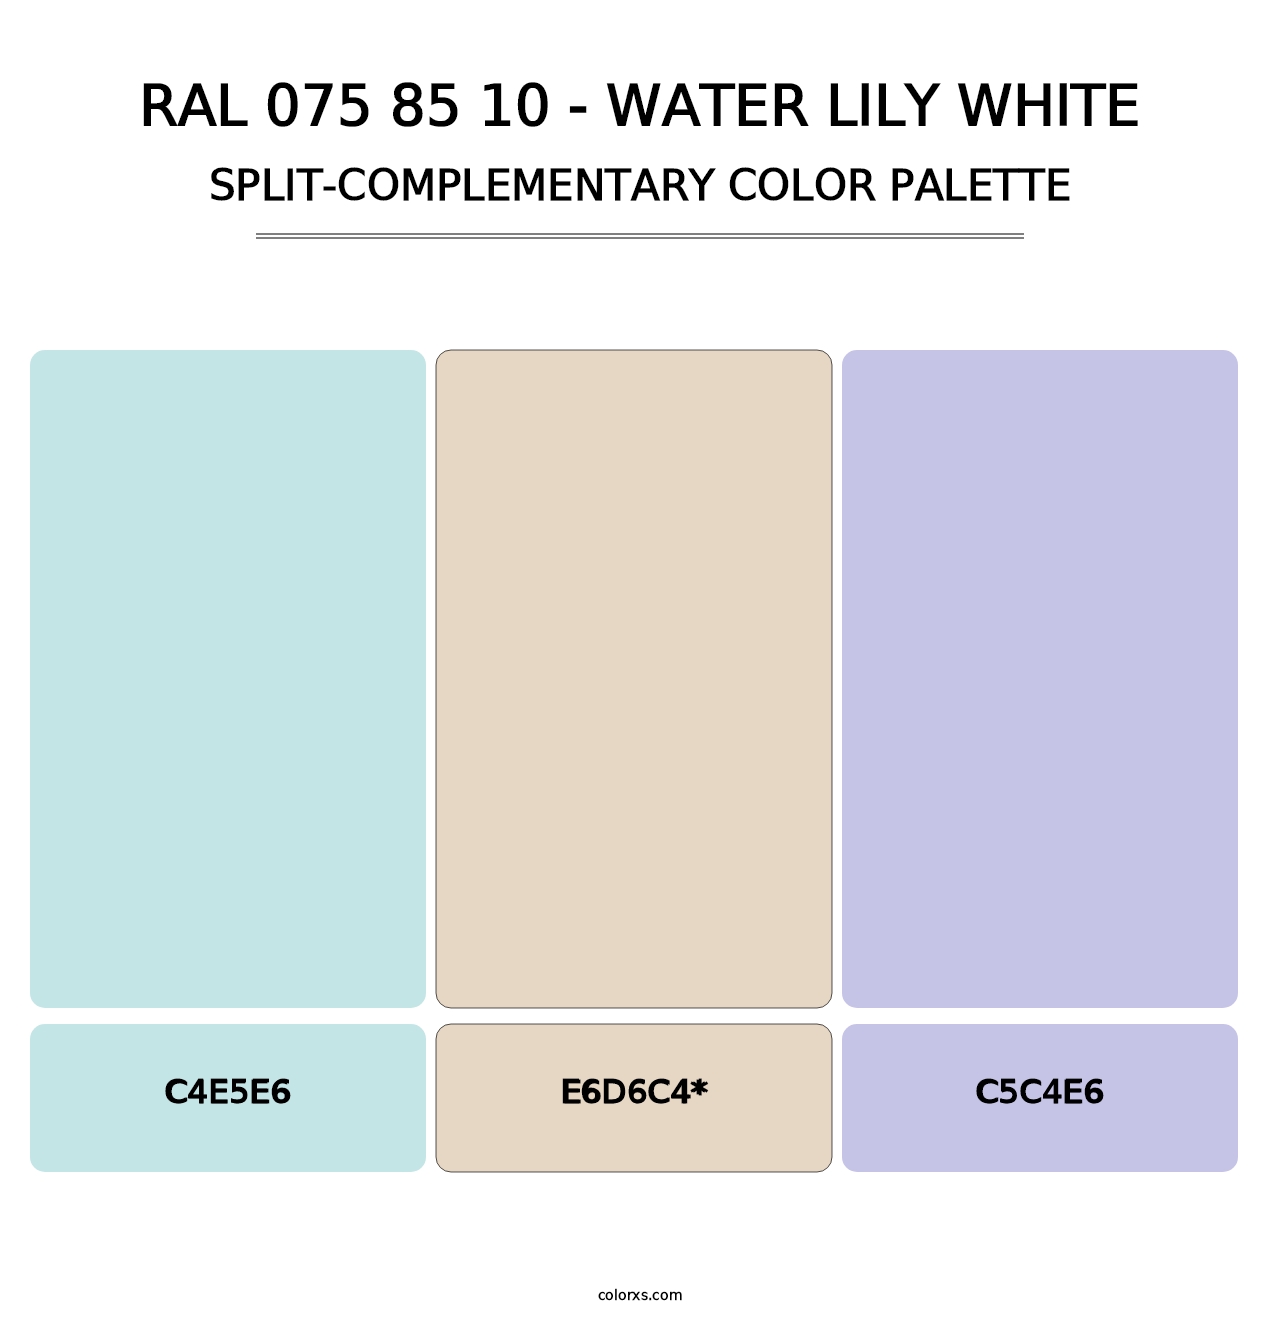 RAL 075 85 10 - Water Lily White - Split-Complementary Color Palette